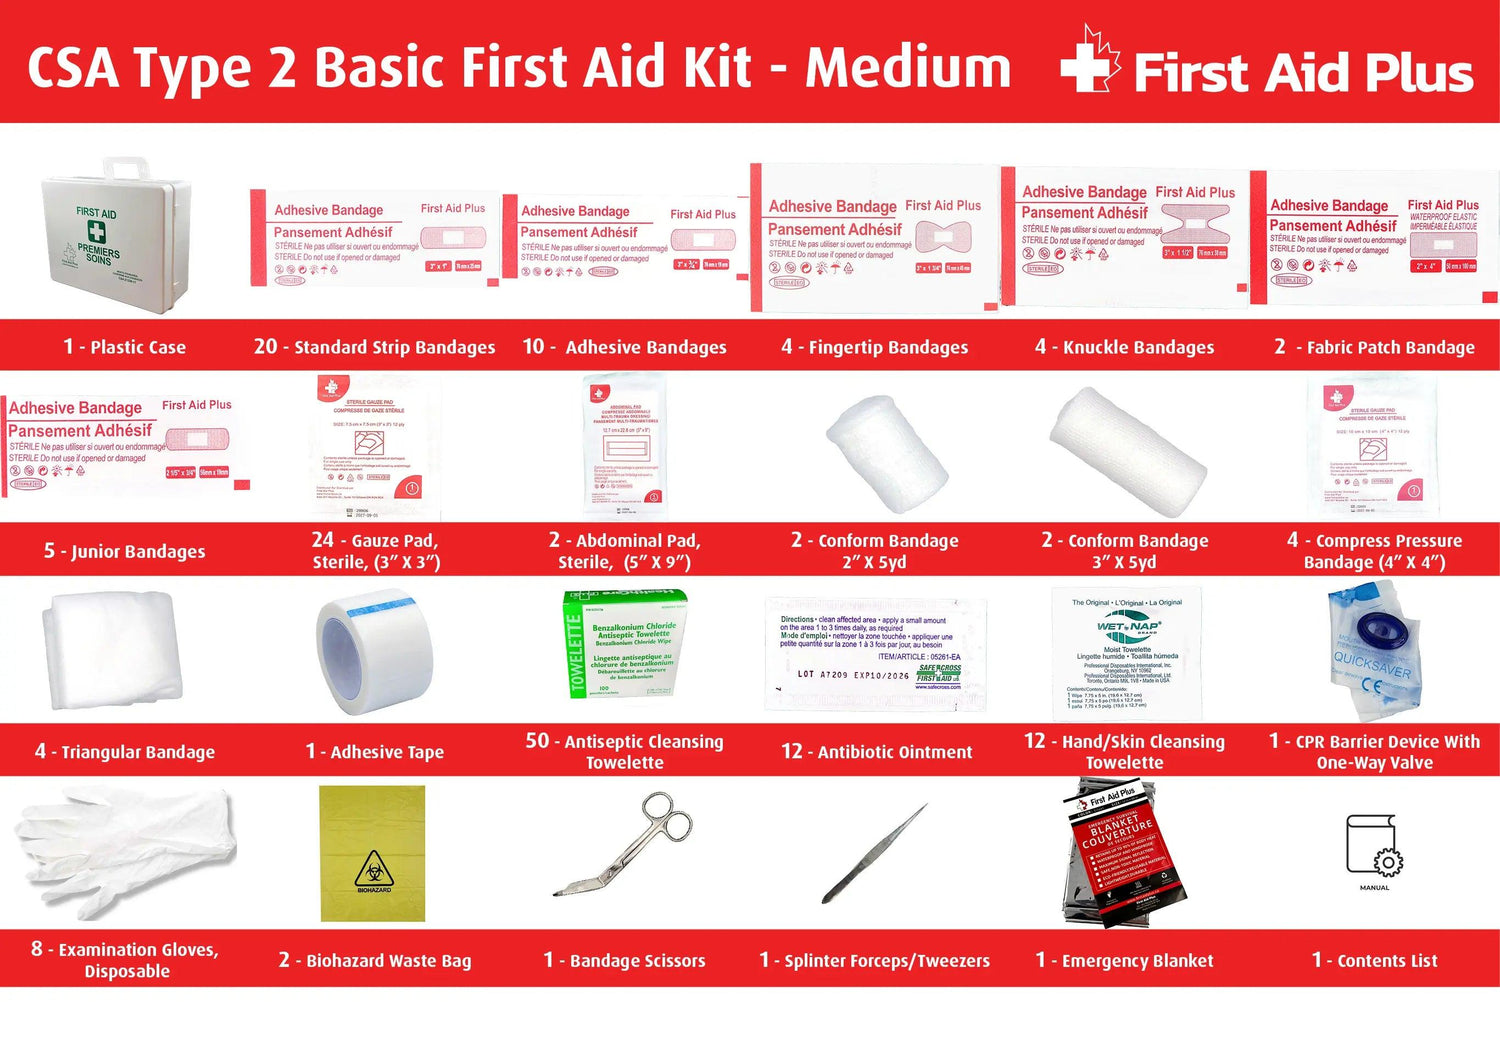 CSA Type 2 Basic First Aid Kit - Medium (26-50 Workers) - First Aid Plus